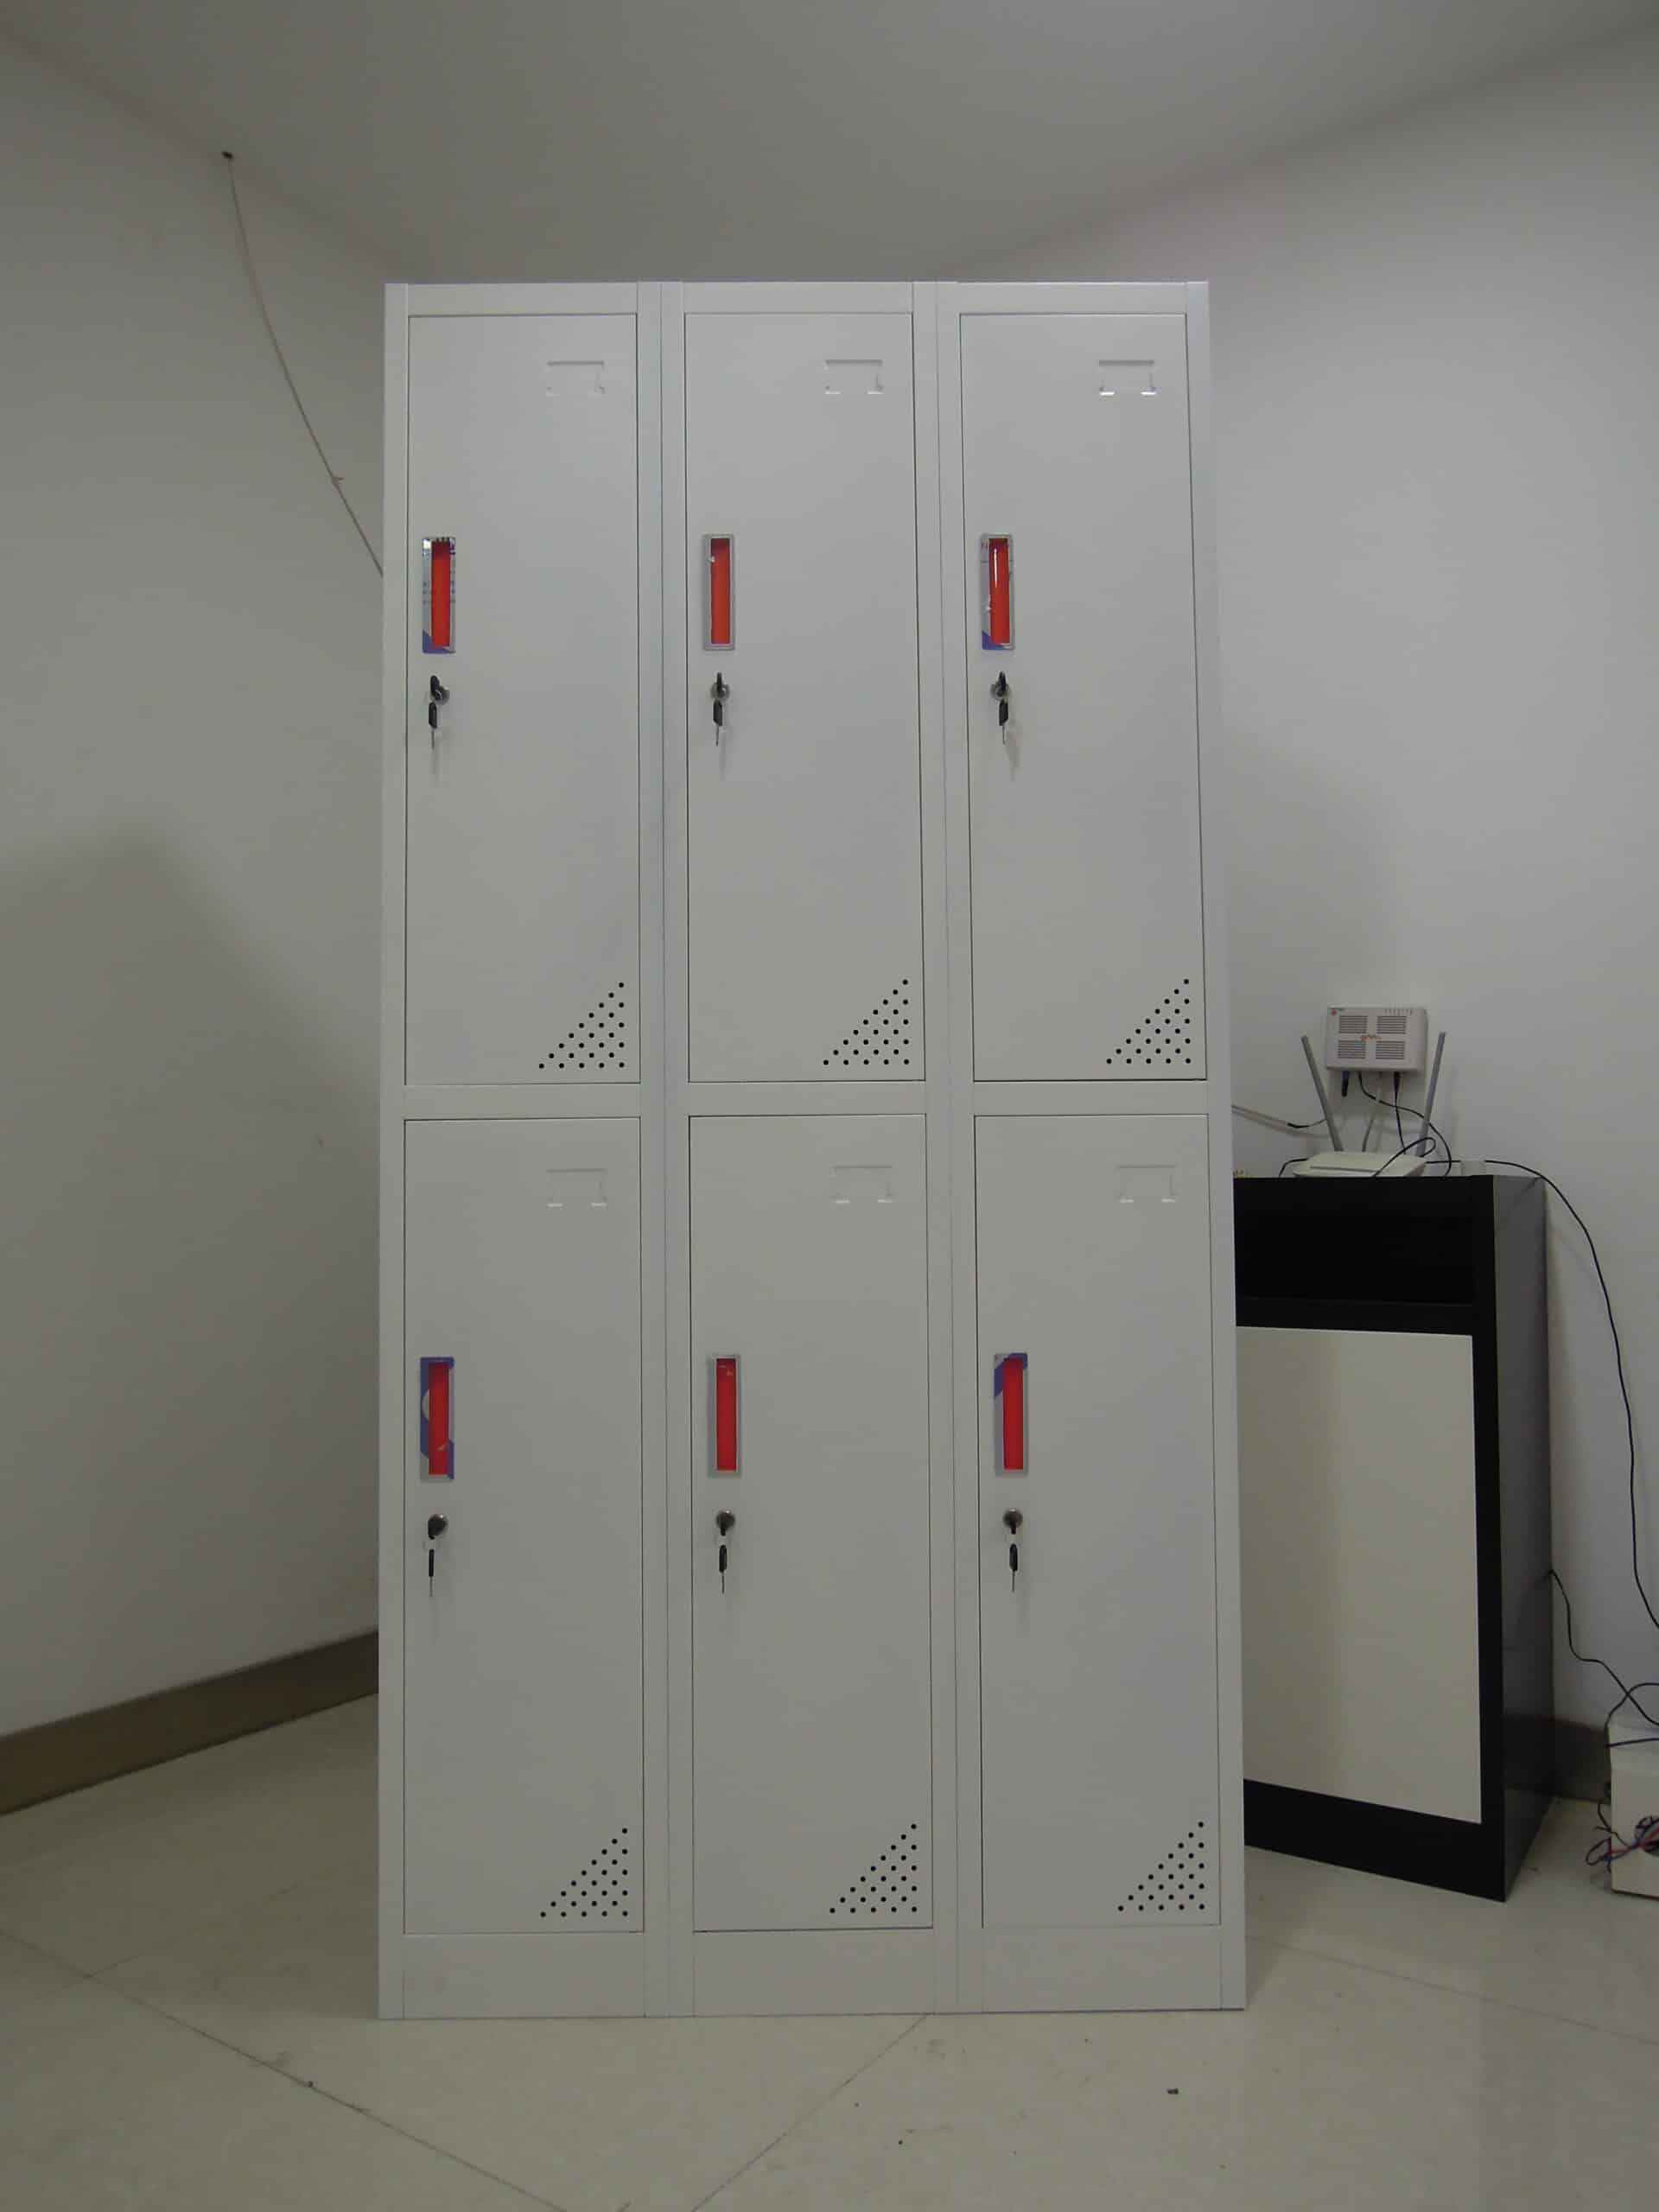 LOCKERS FOR SCHOOL, GYMS & SPORT TEAM ROOMS